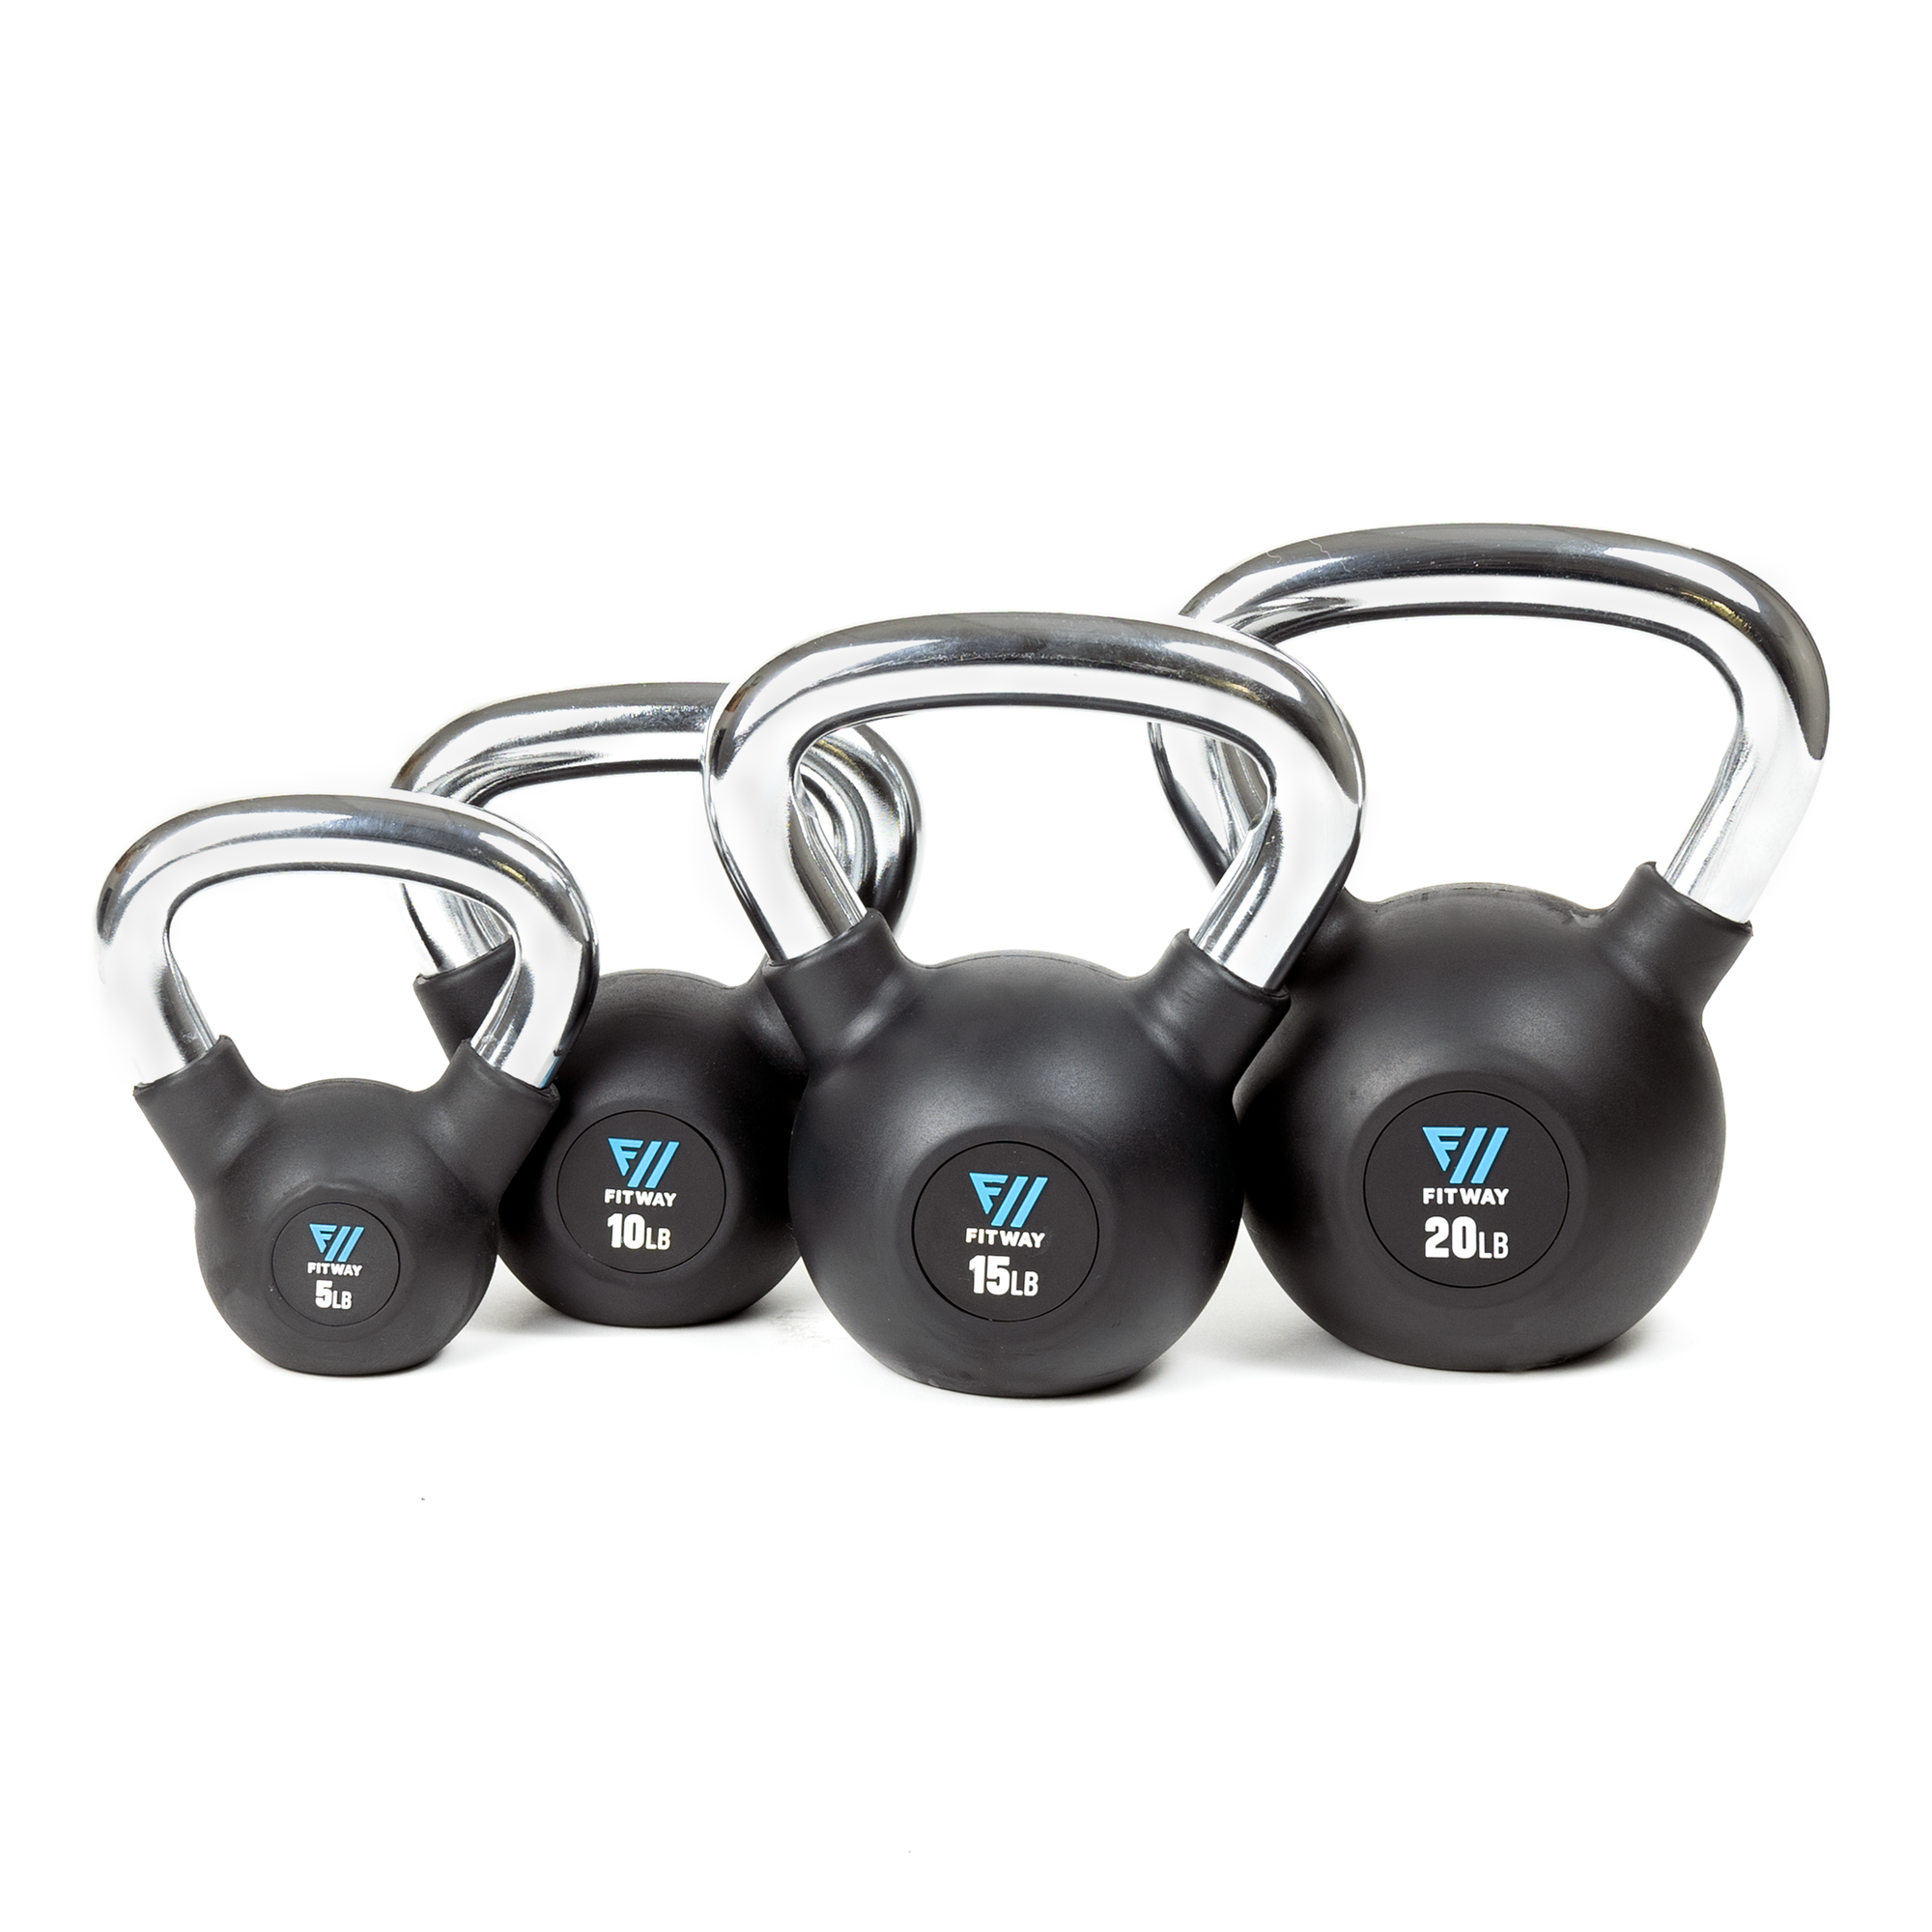 FitWay Equip. Rubber Coated 45lb Kettlebell